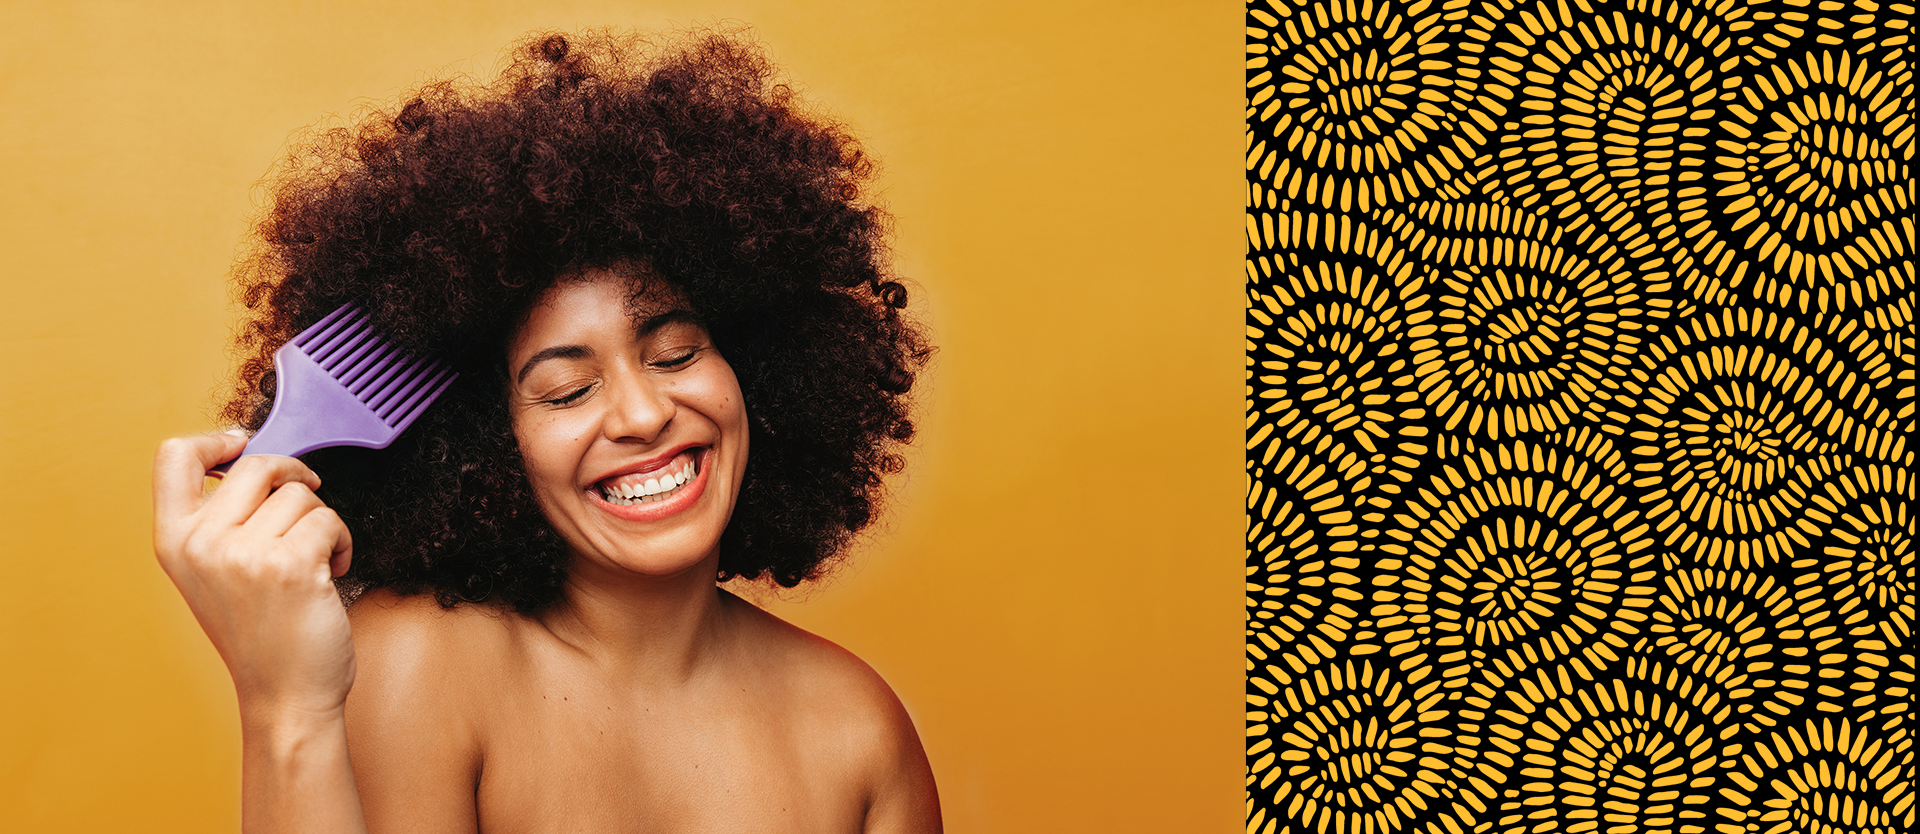 African American girl with an afro standing in front of a yellow background smiling as her head is tilted 